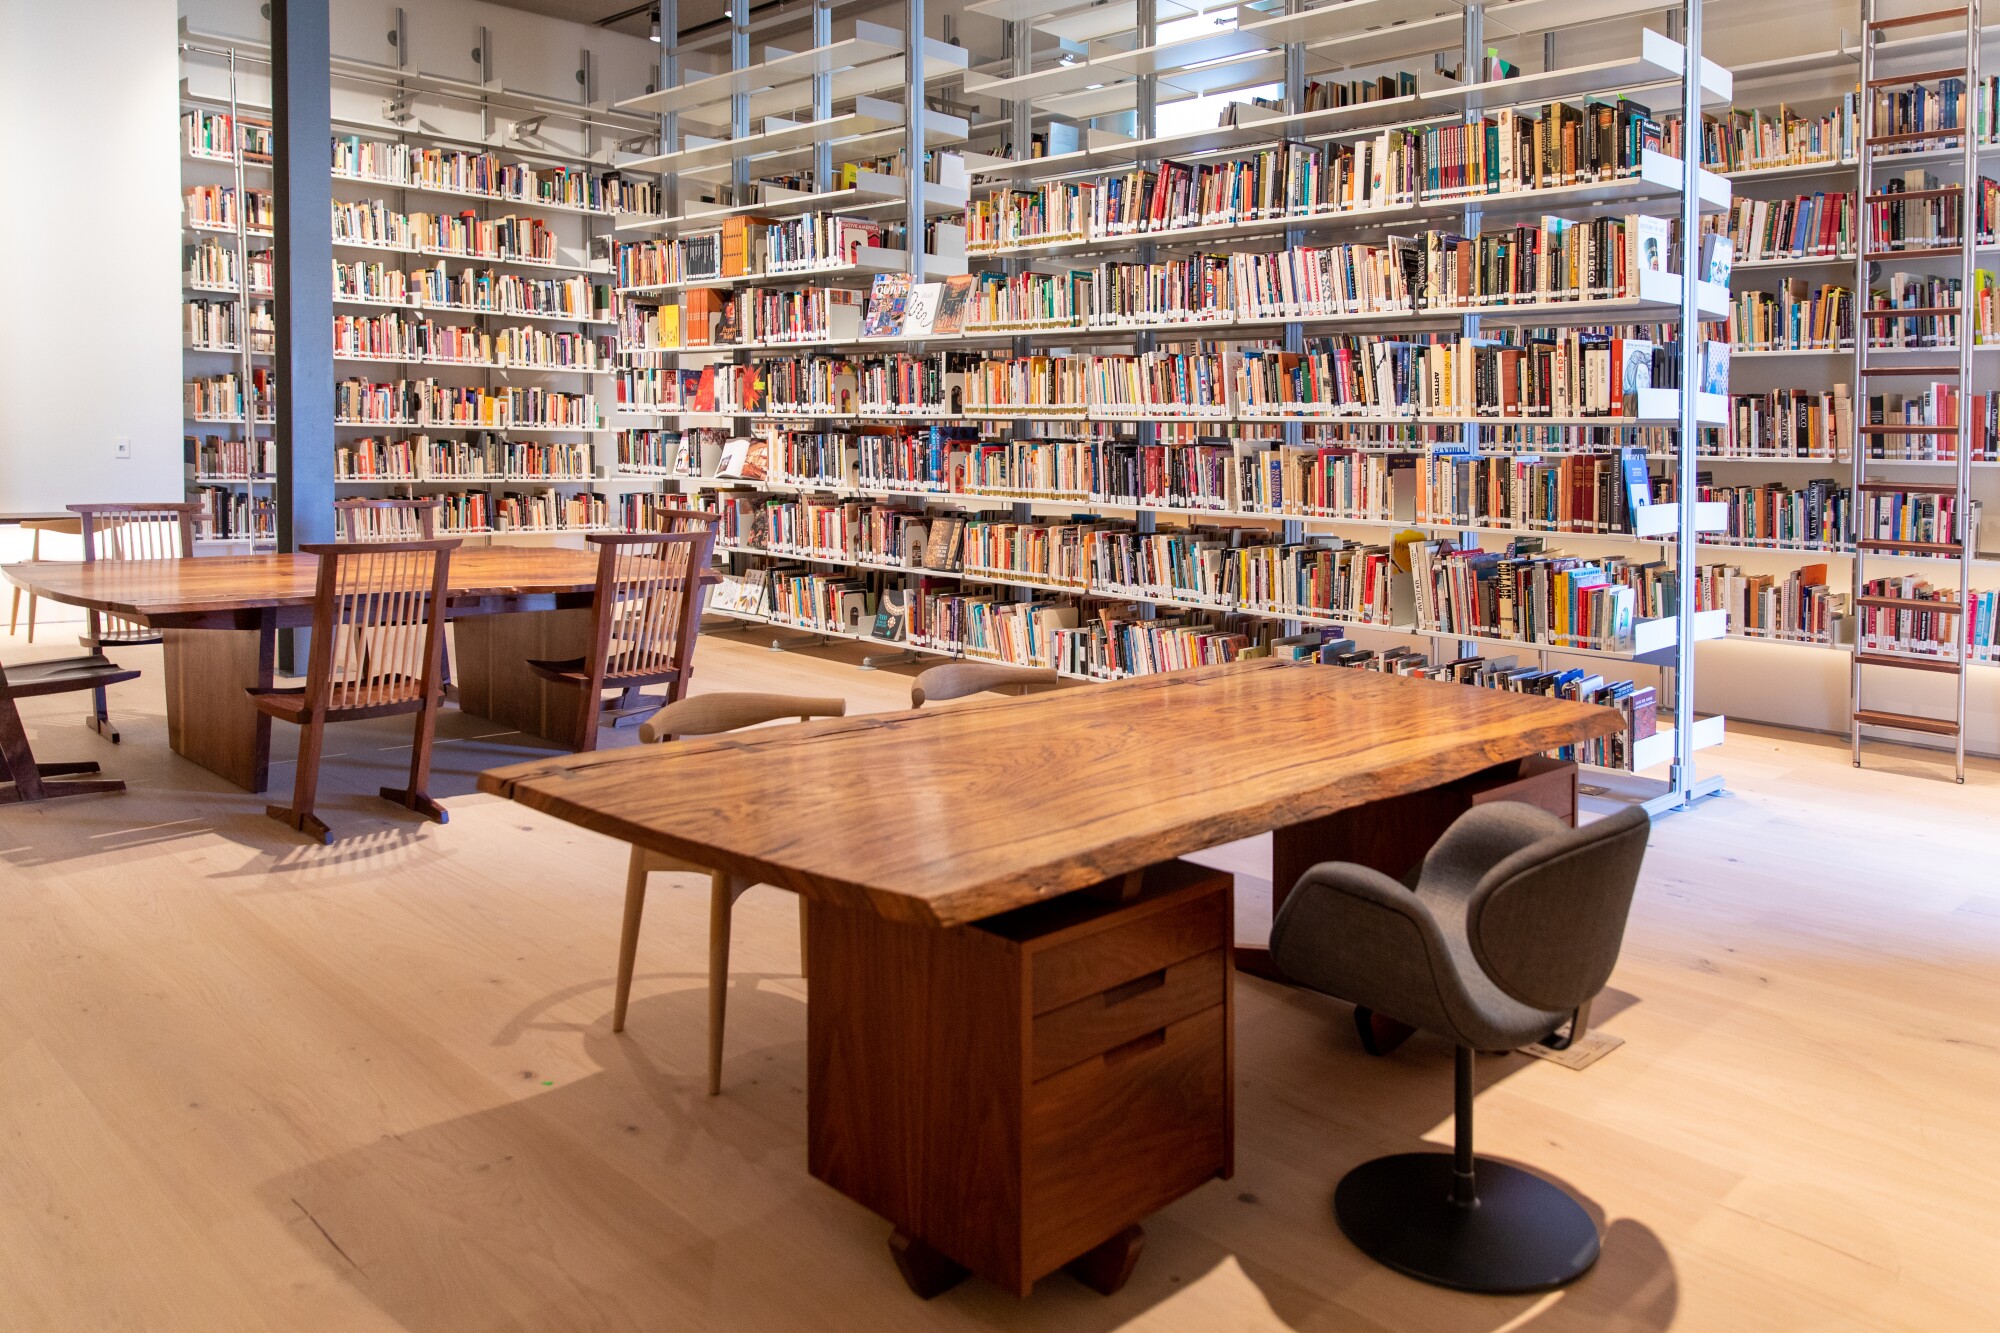 Two hand-crafted wood desks by George Nakashima are seen against a backdrop of Vitsoe 606 book shelves.